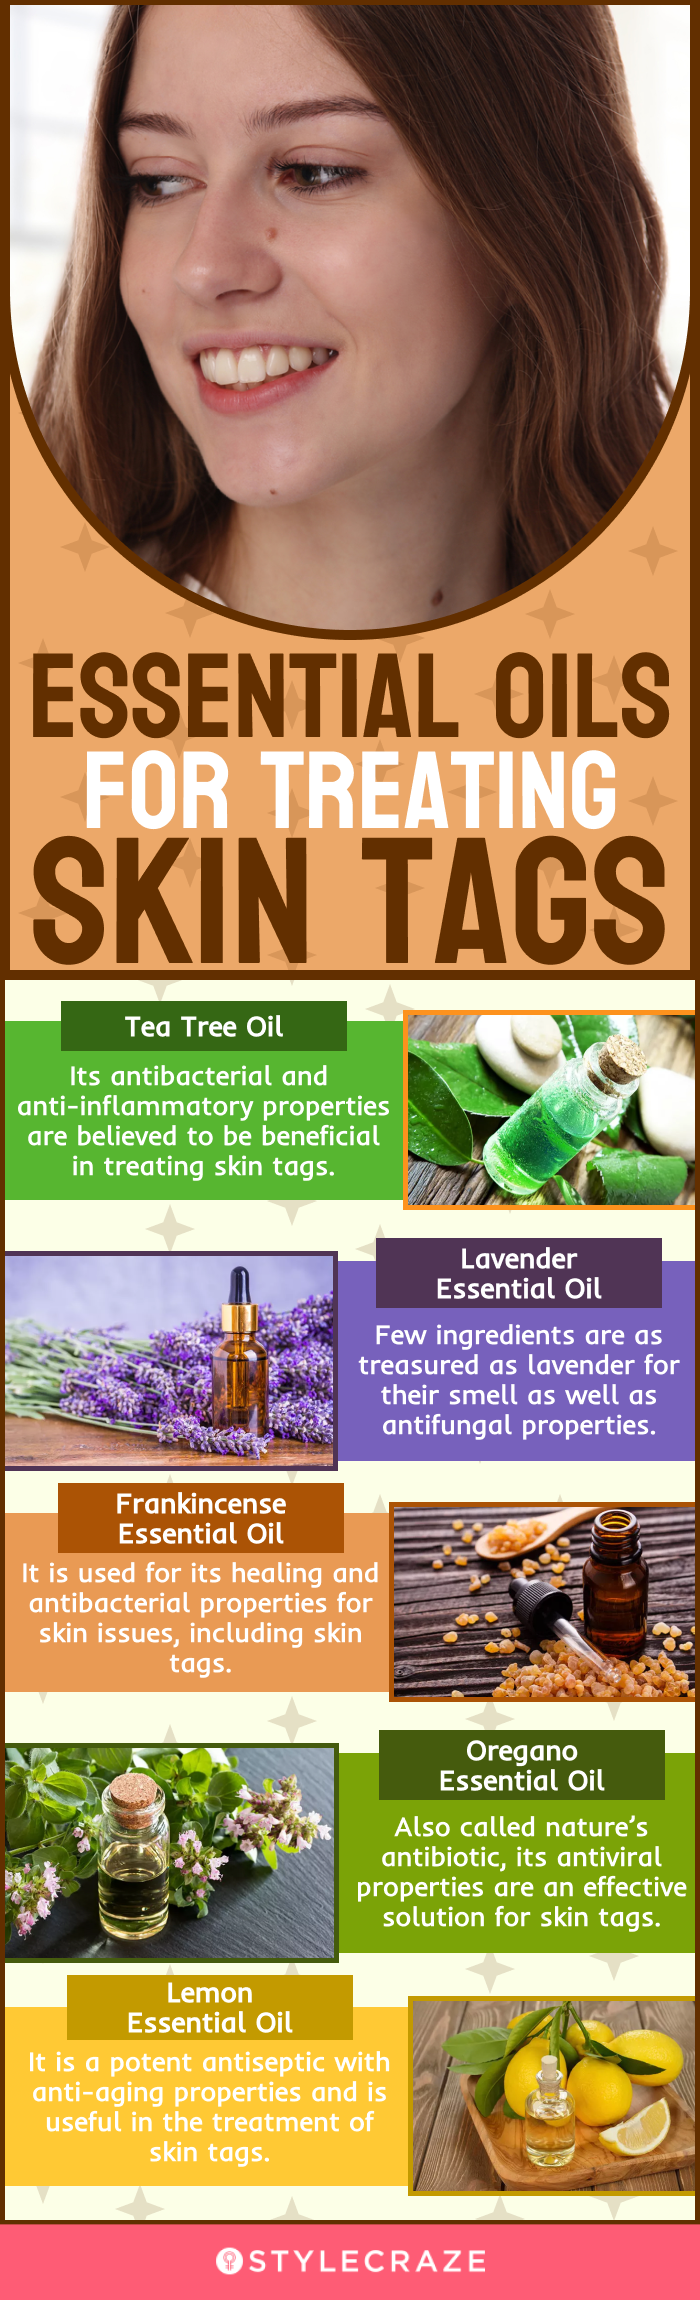 essential oils for treating skin tags (infographic)